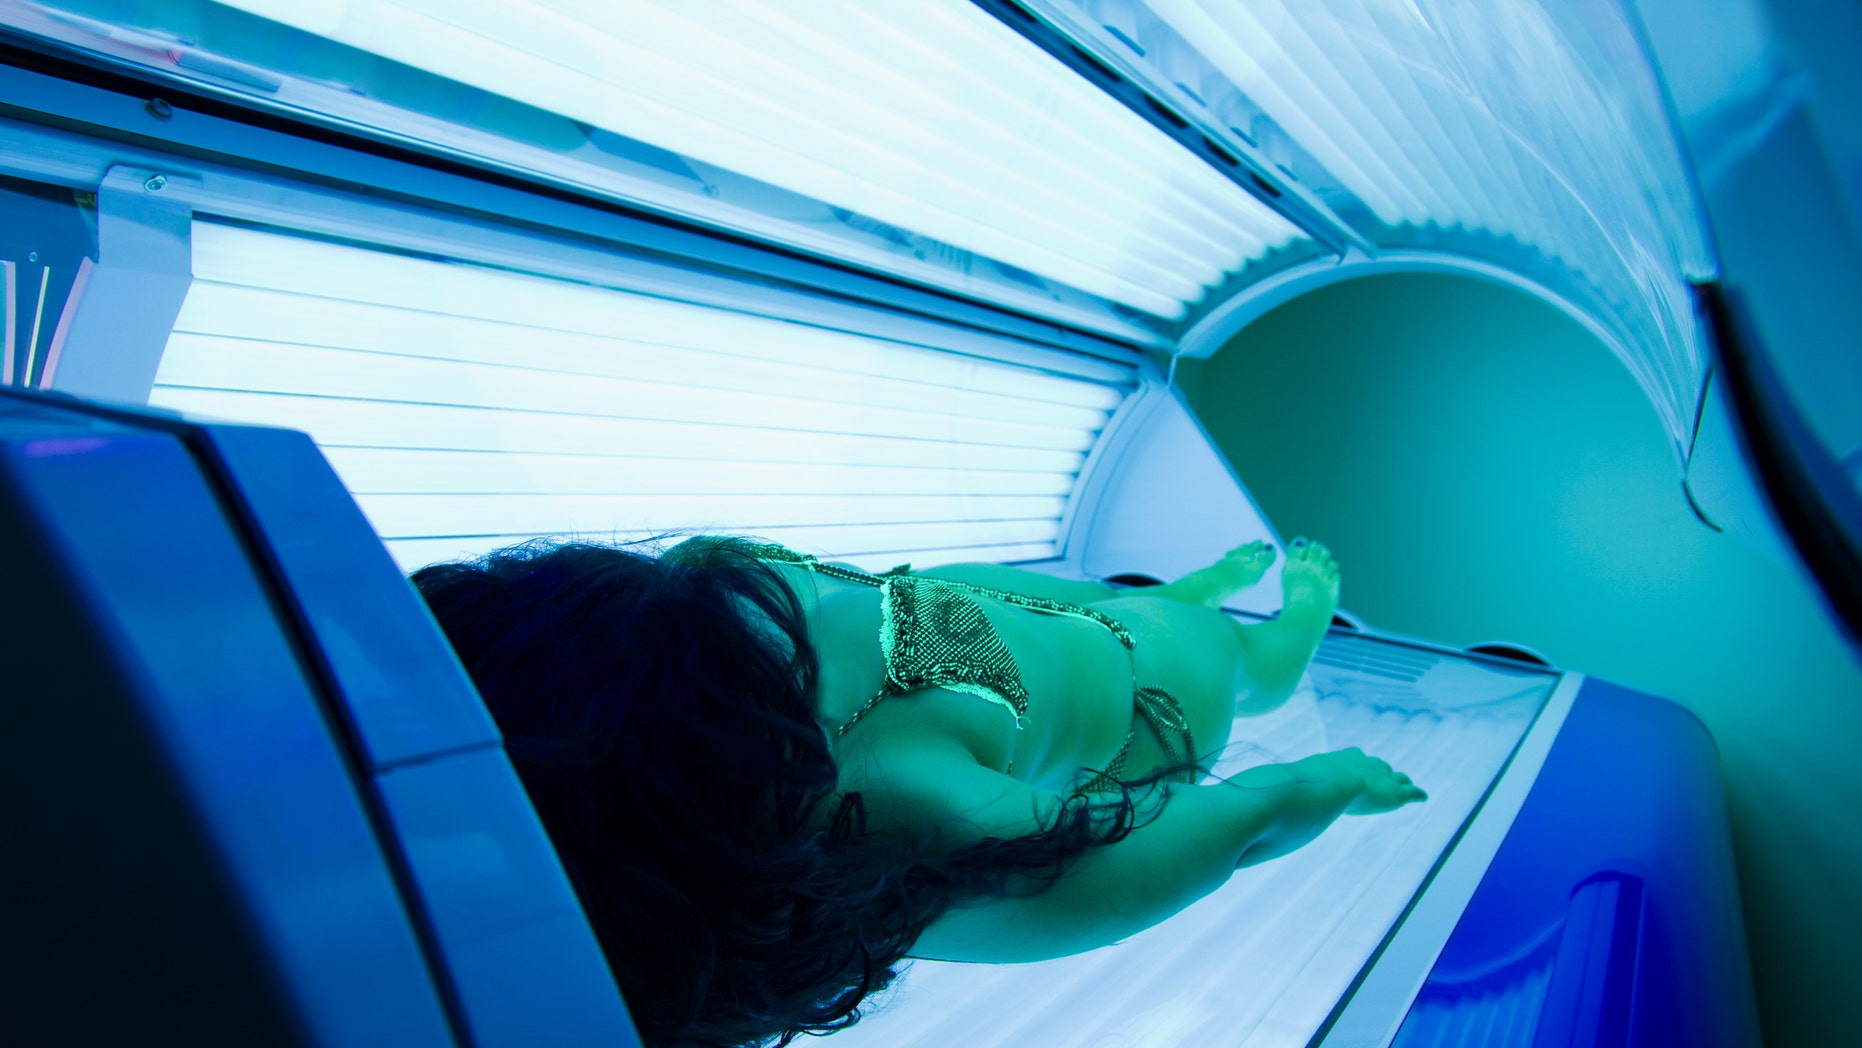 Tanning Bed Istock Large 2 ?ve=1&tl=1?ve=1&tl=1